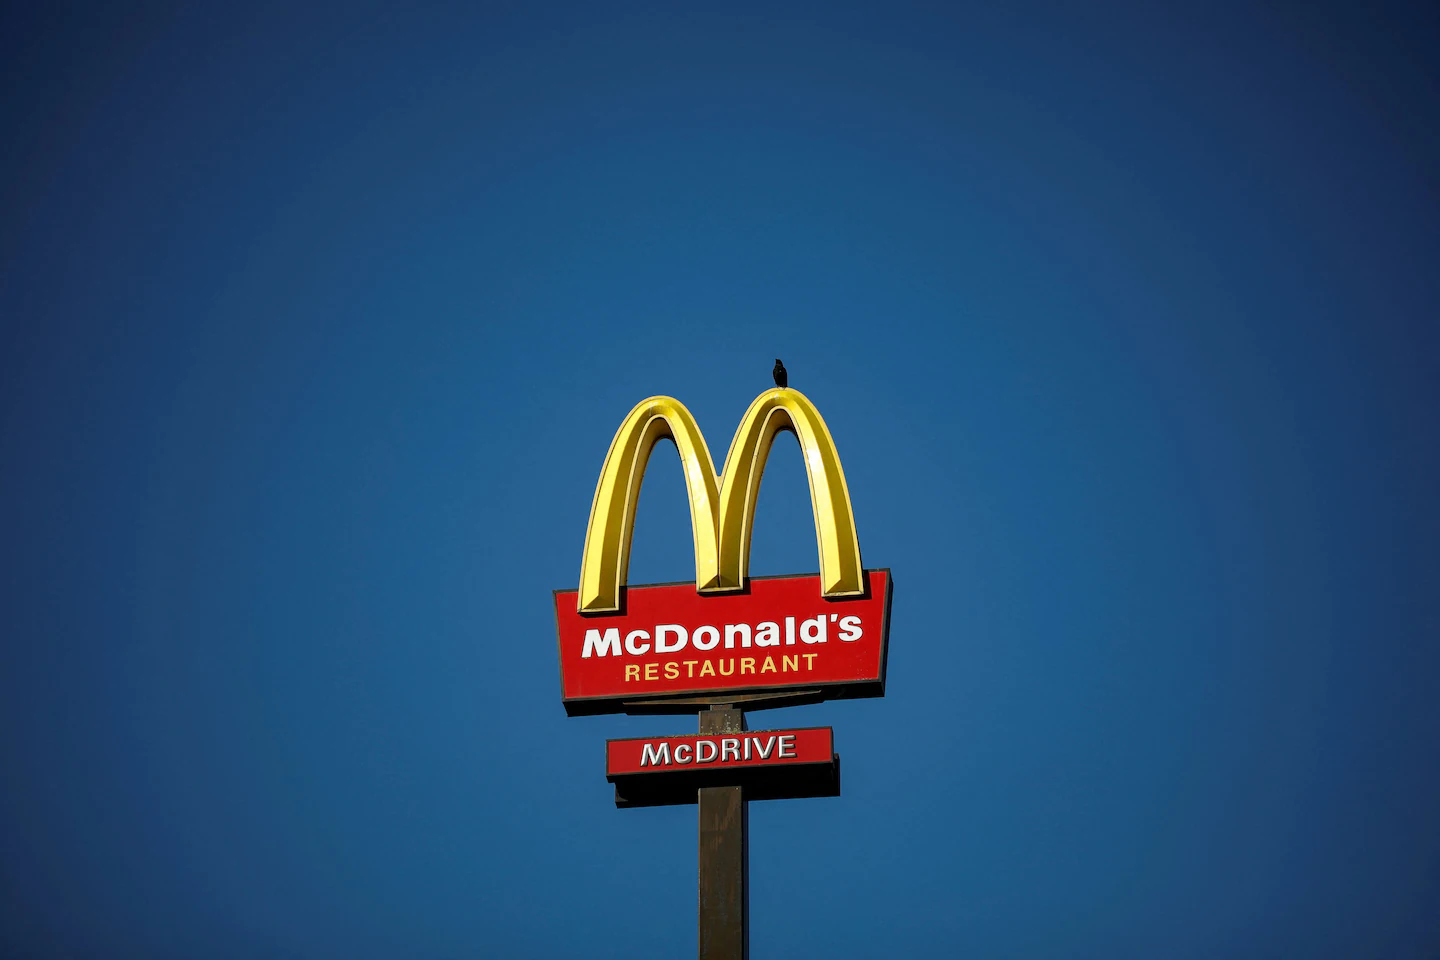 Carl Icahn starts a proxy fight with McDonald's over the welfare of pigs